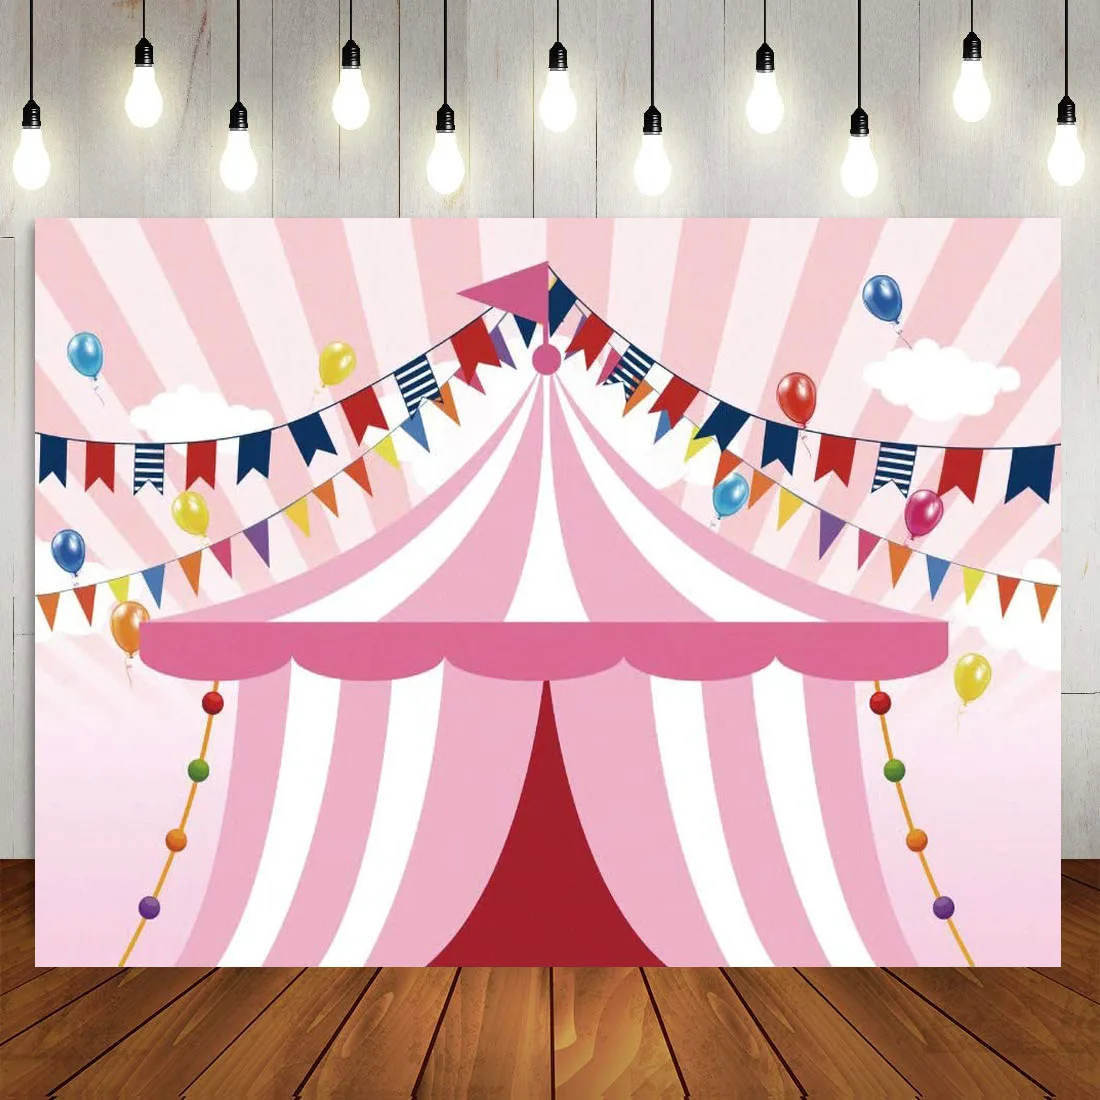 

Pink Circus Tents Theme Party Backdrop Carnival Carousel Photography Background Girl Princess Newborn Baby Shower Table Banner